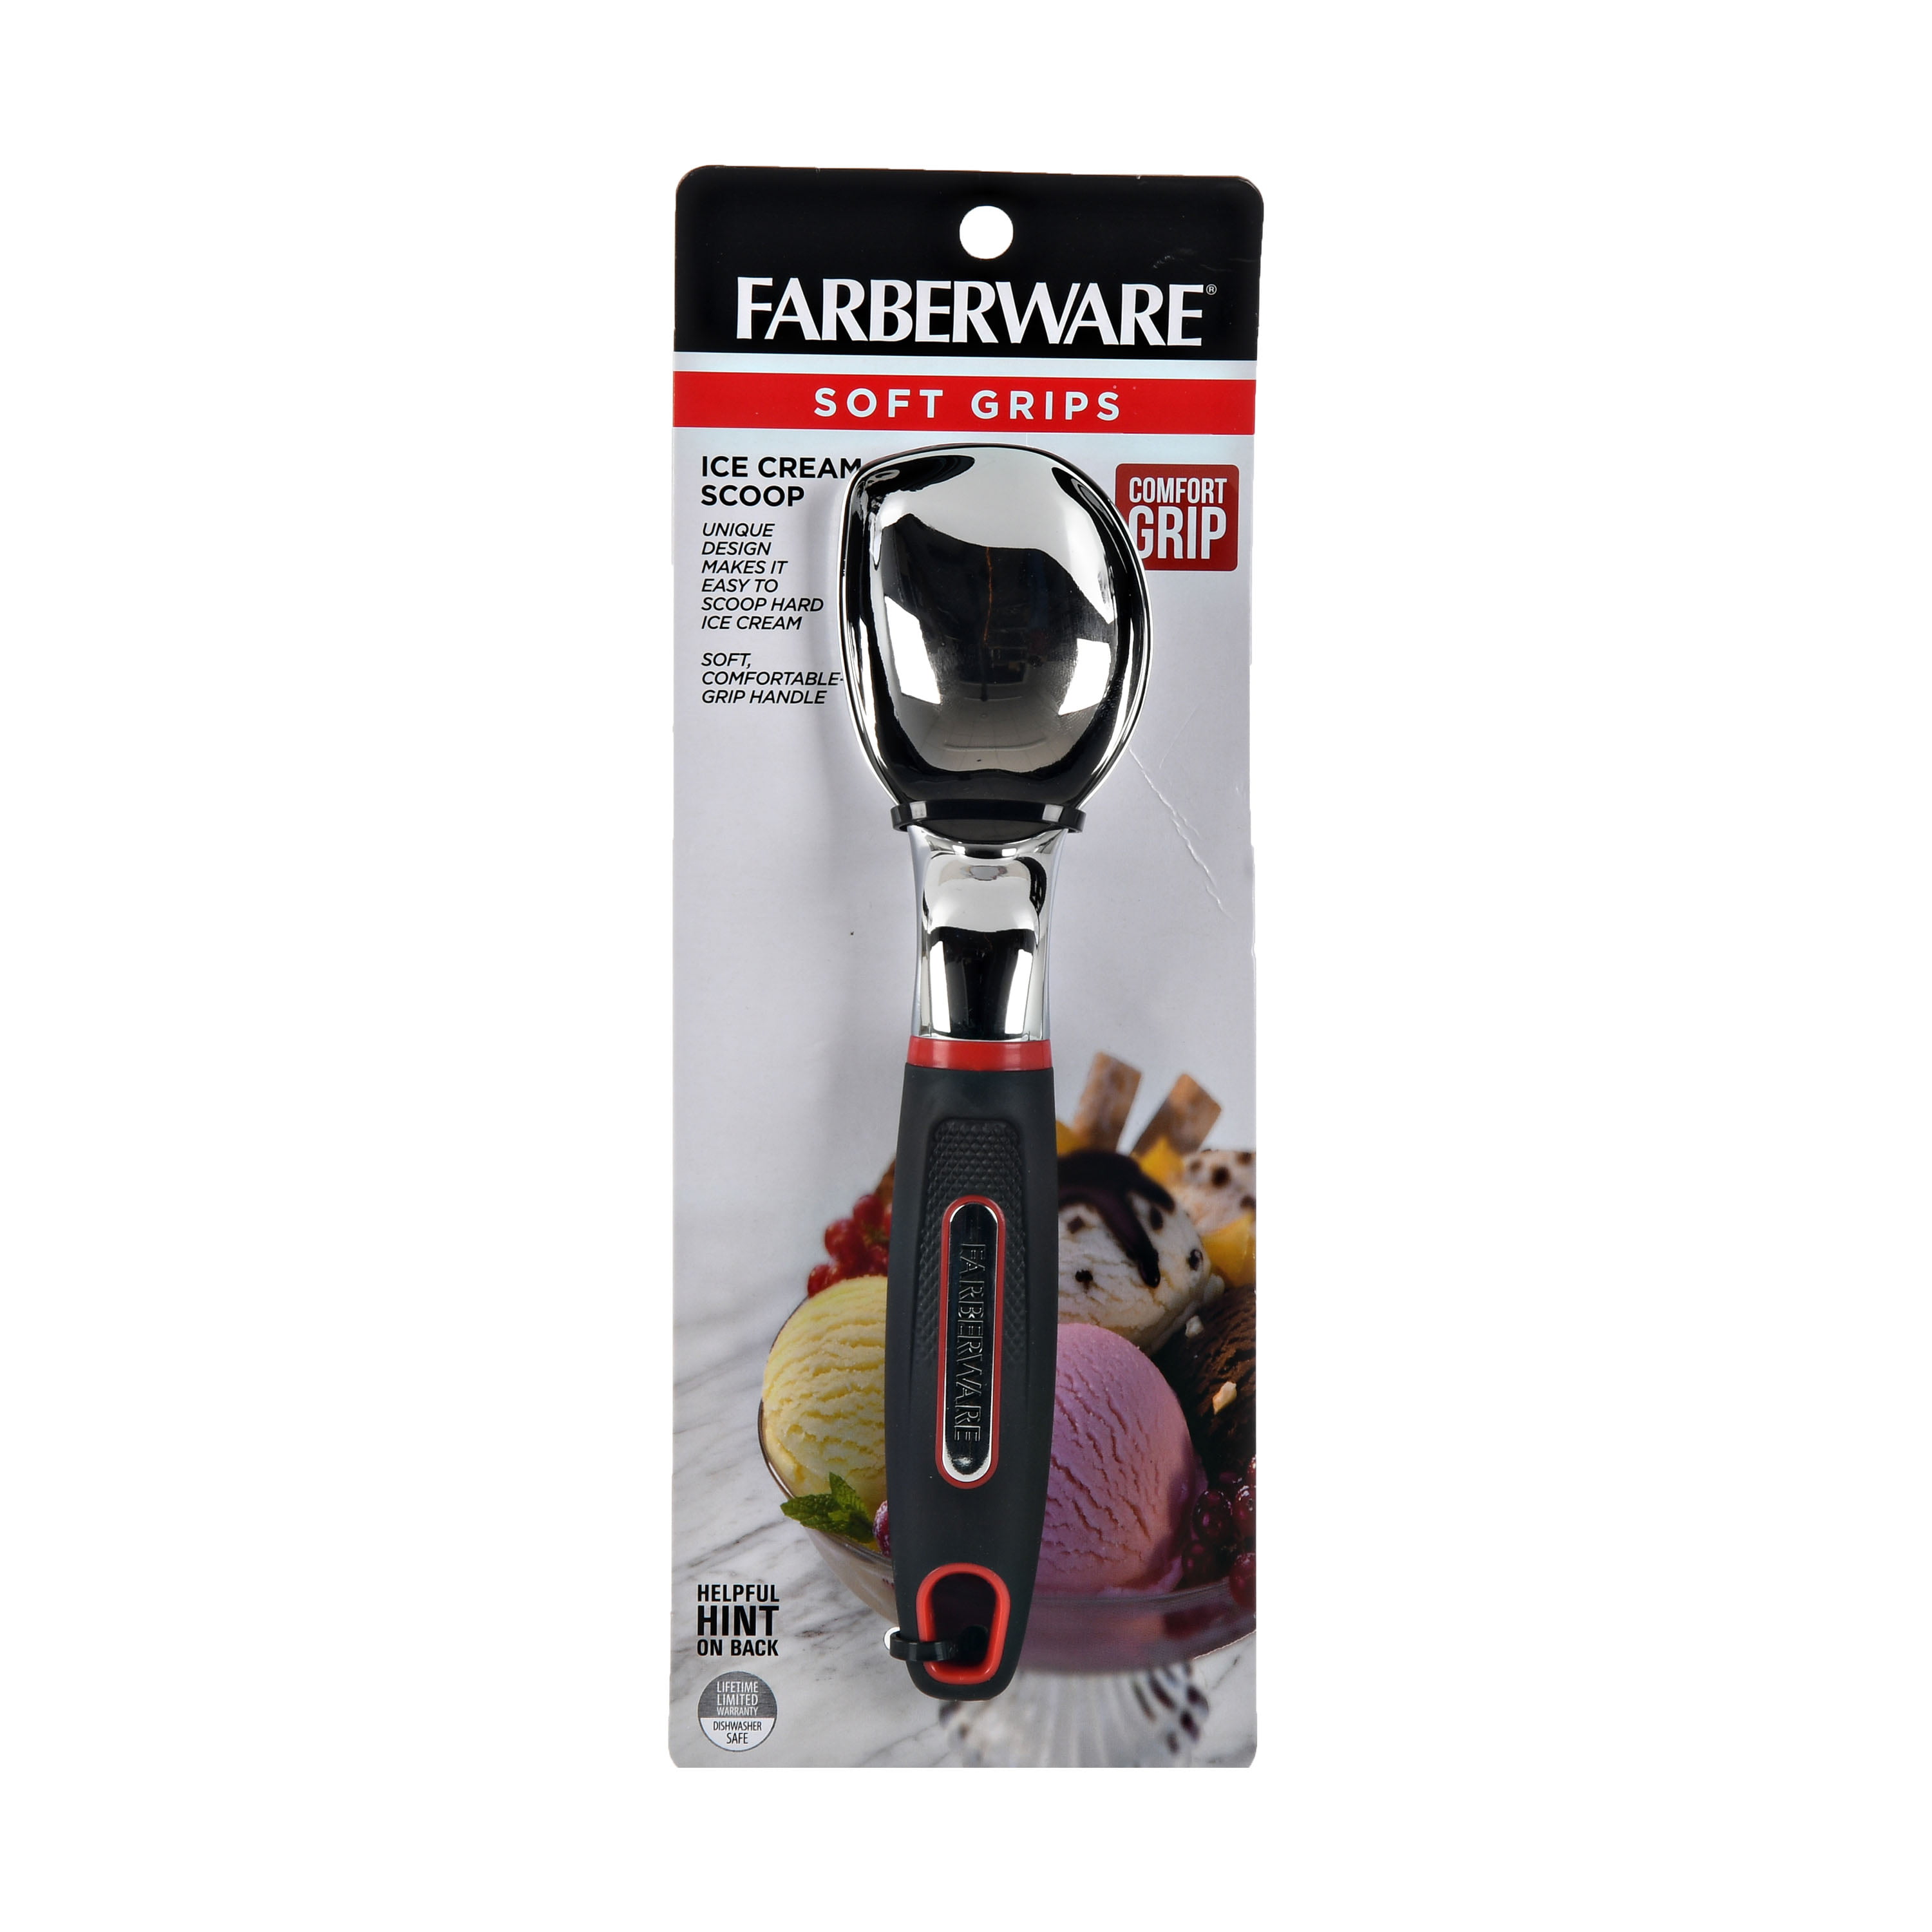 Farberware Soft Grips Ice Cream Scoop with Black Handle and Red Accents ...